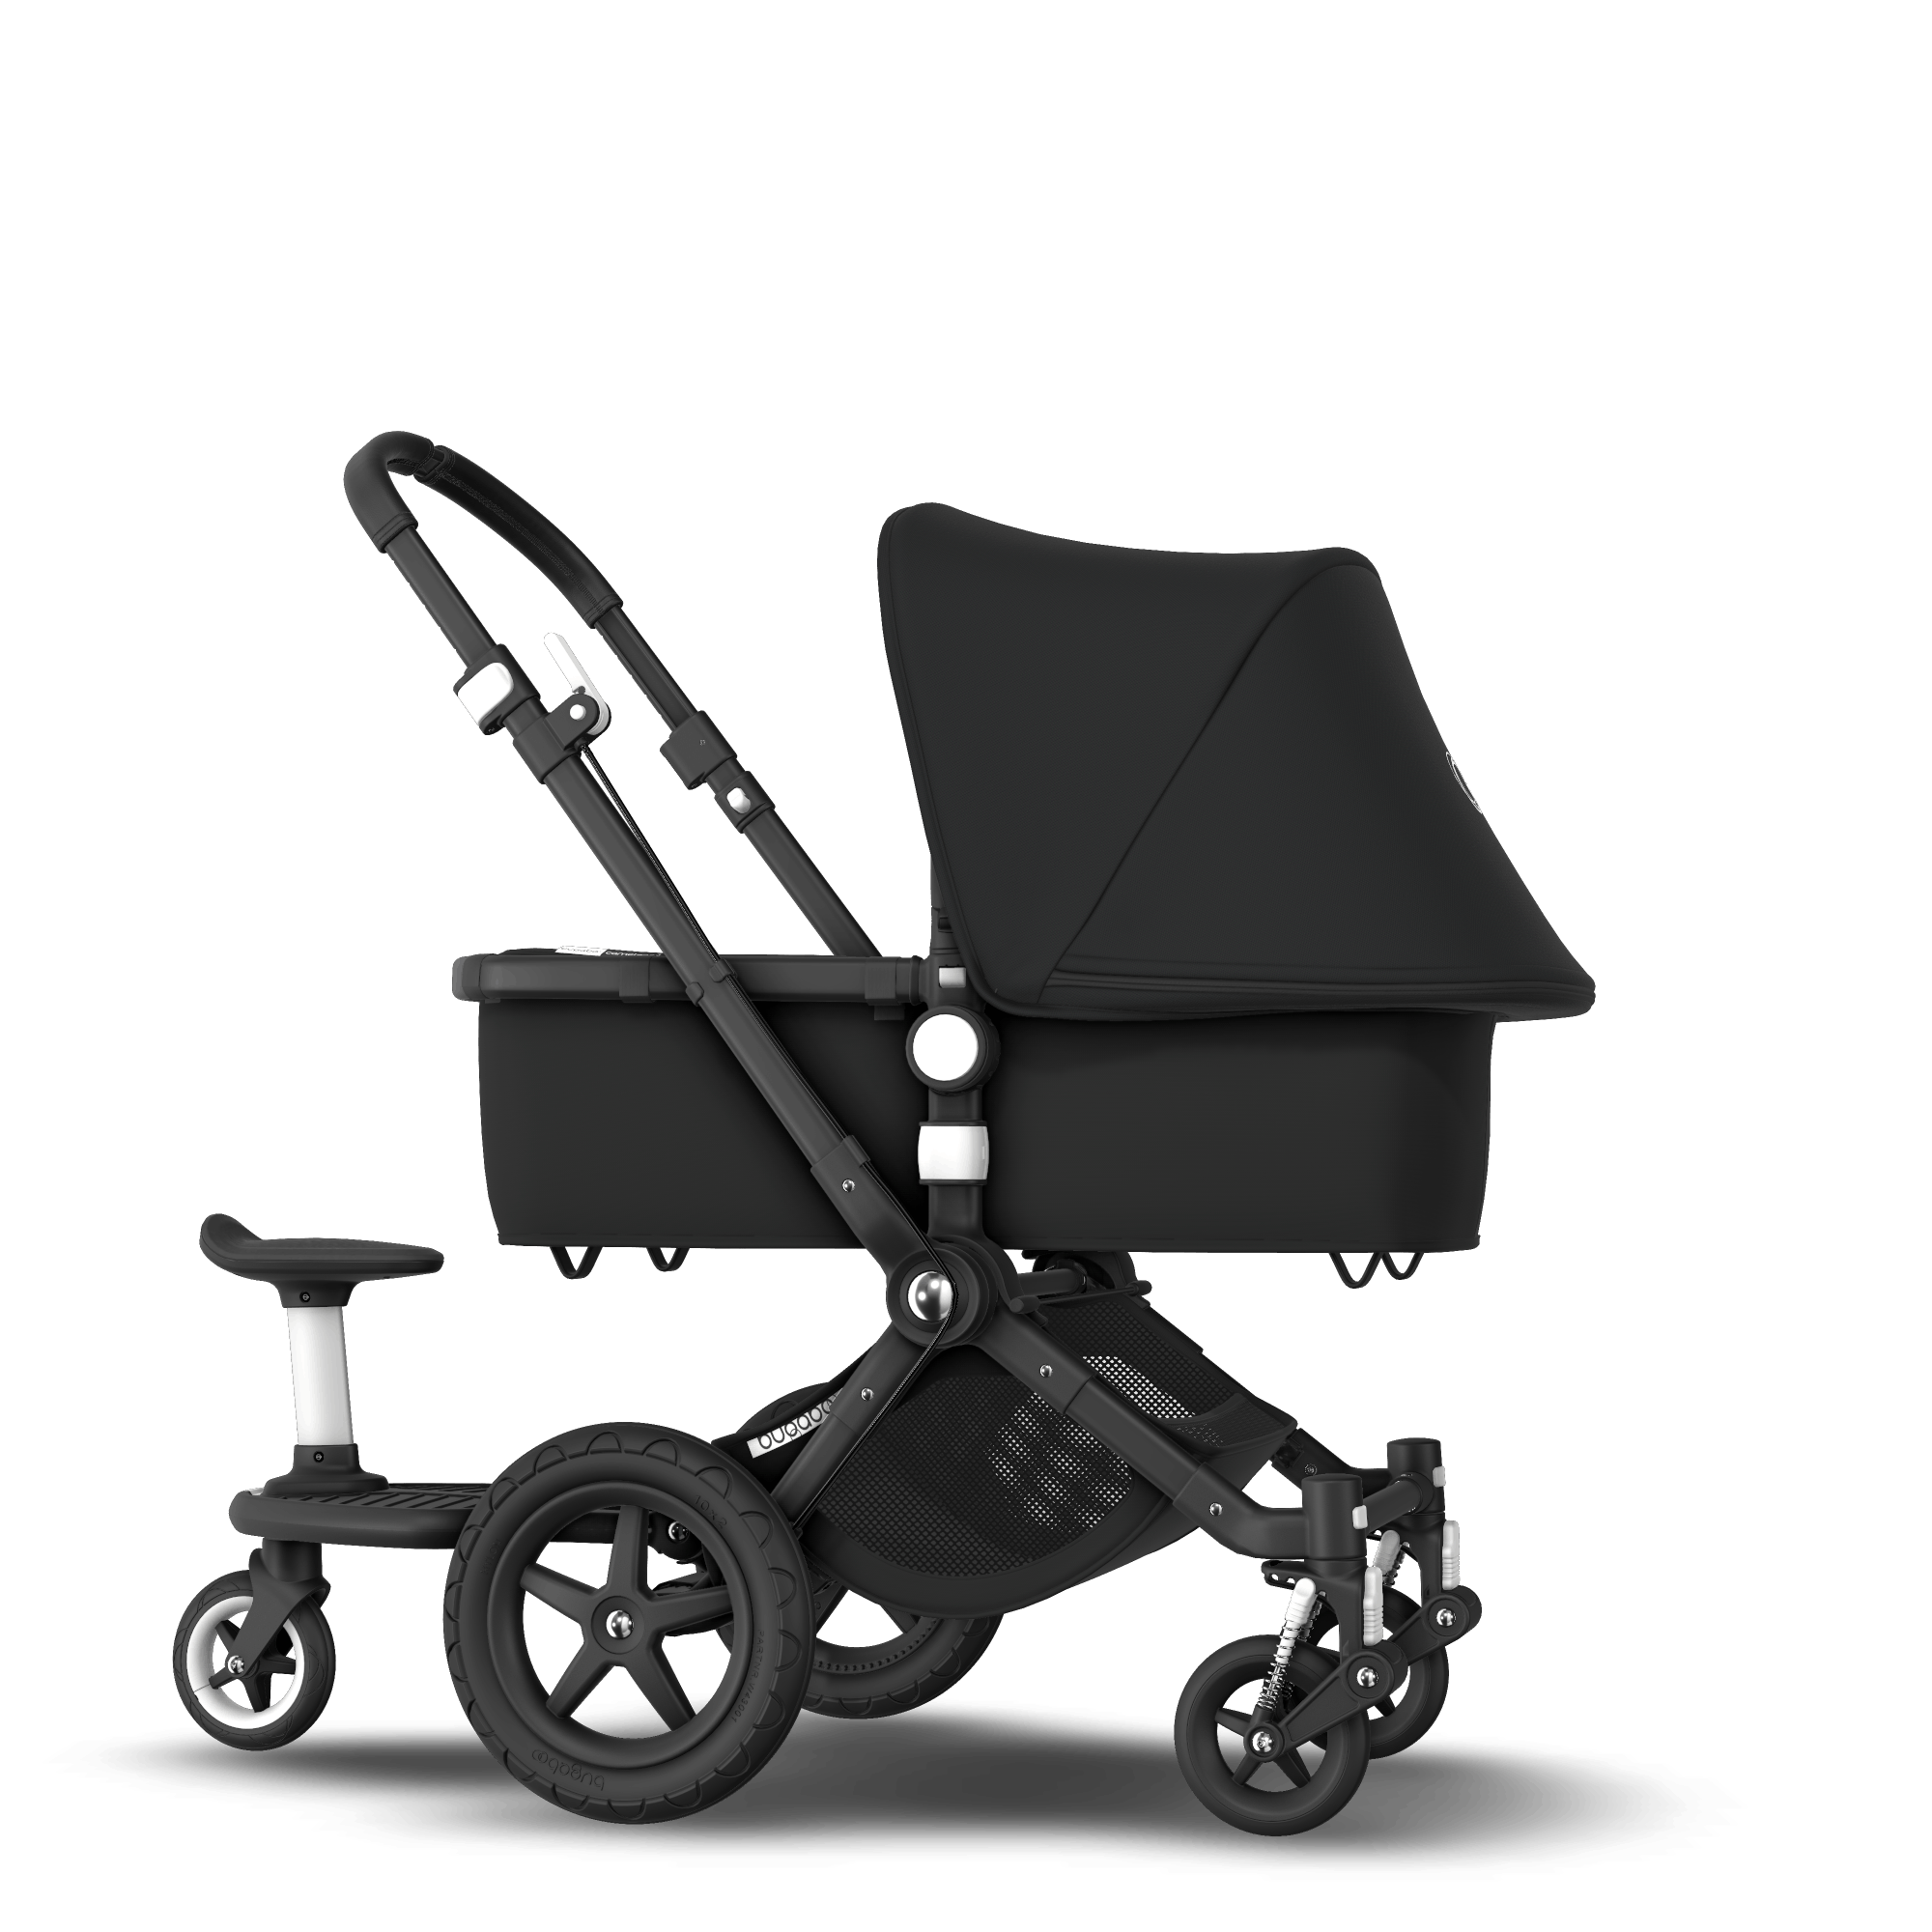 Bugaboo Cameleon 3 Plus seat and carrycot pushchair Black sun canopy, black  fabrics, black chassis